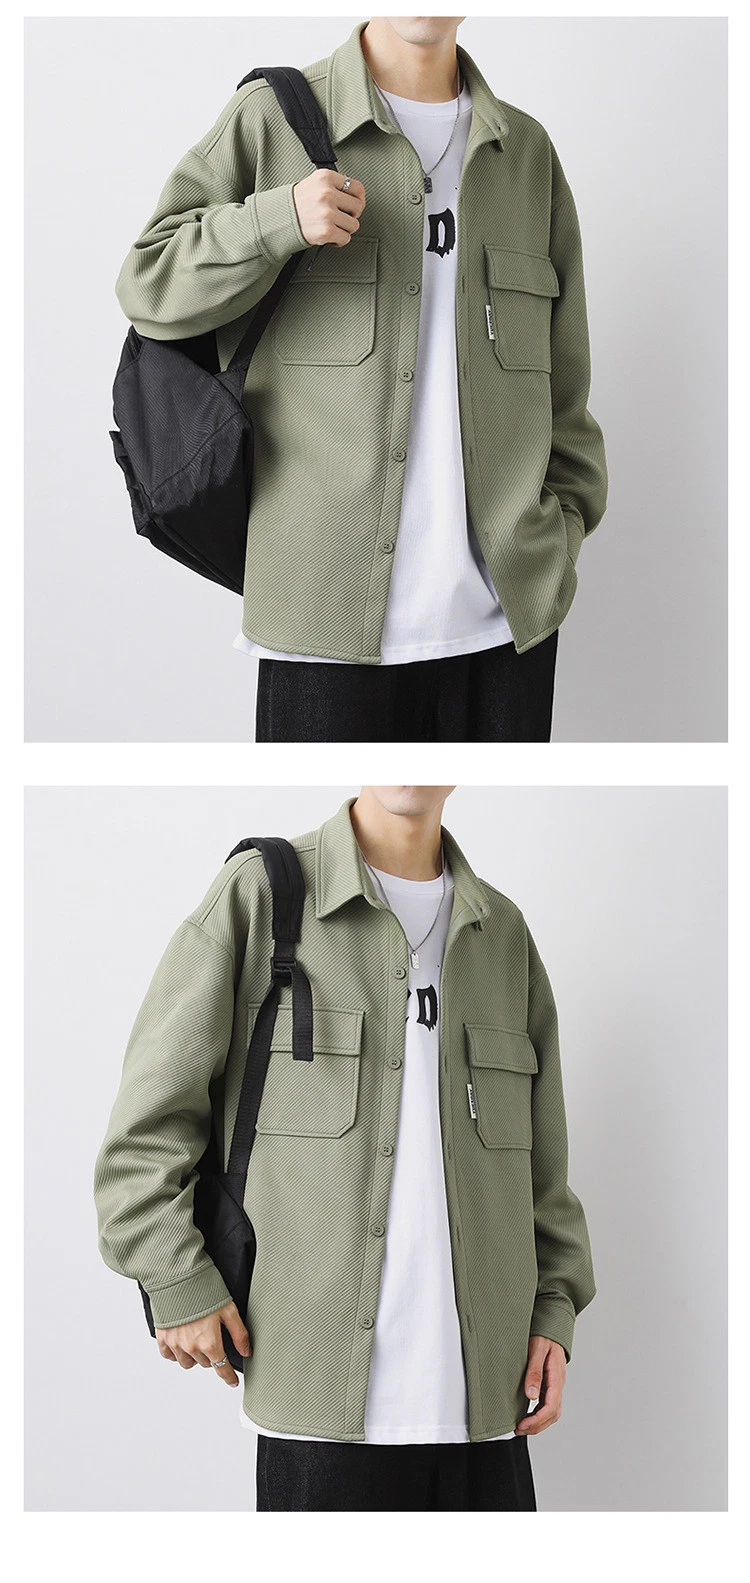 New Spring and Autumn Male′ S Worksuit Multi-Pocket Trend Ins Student Solid Color Top Casual Jacket/Jackets/Coat/Overcoat/Outerwear/Clothing/Clothes